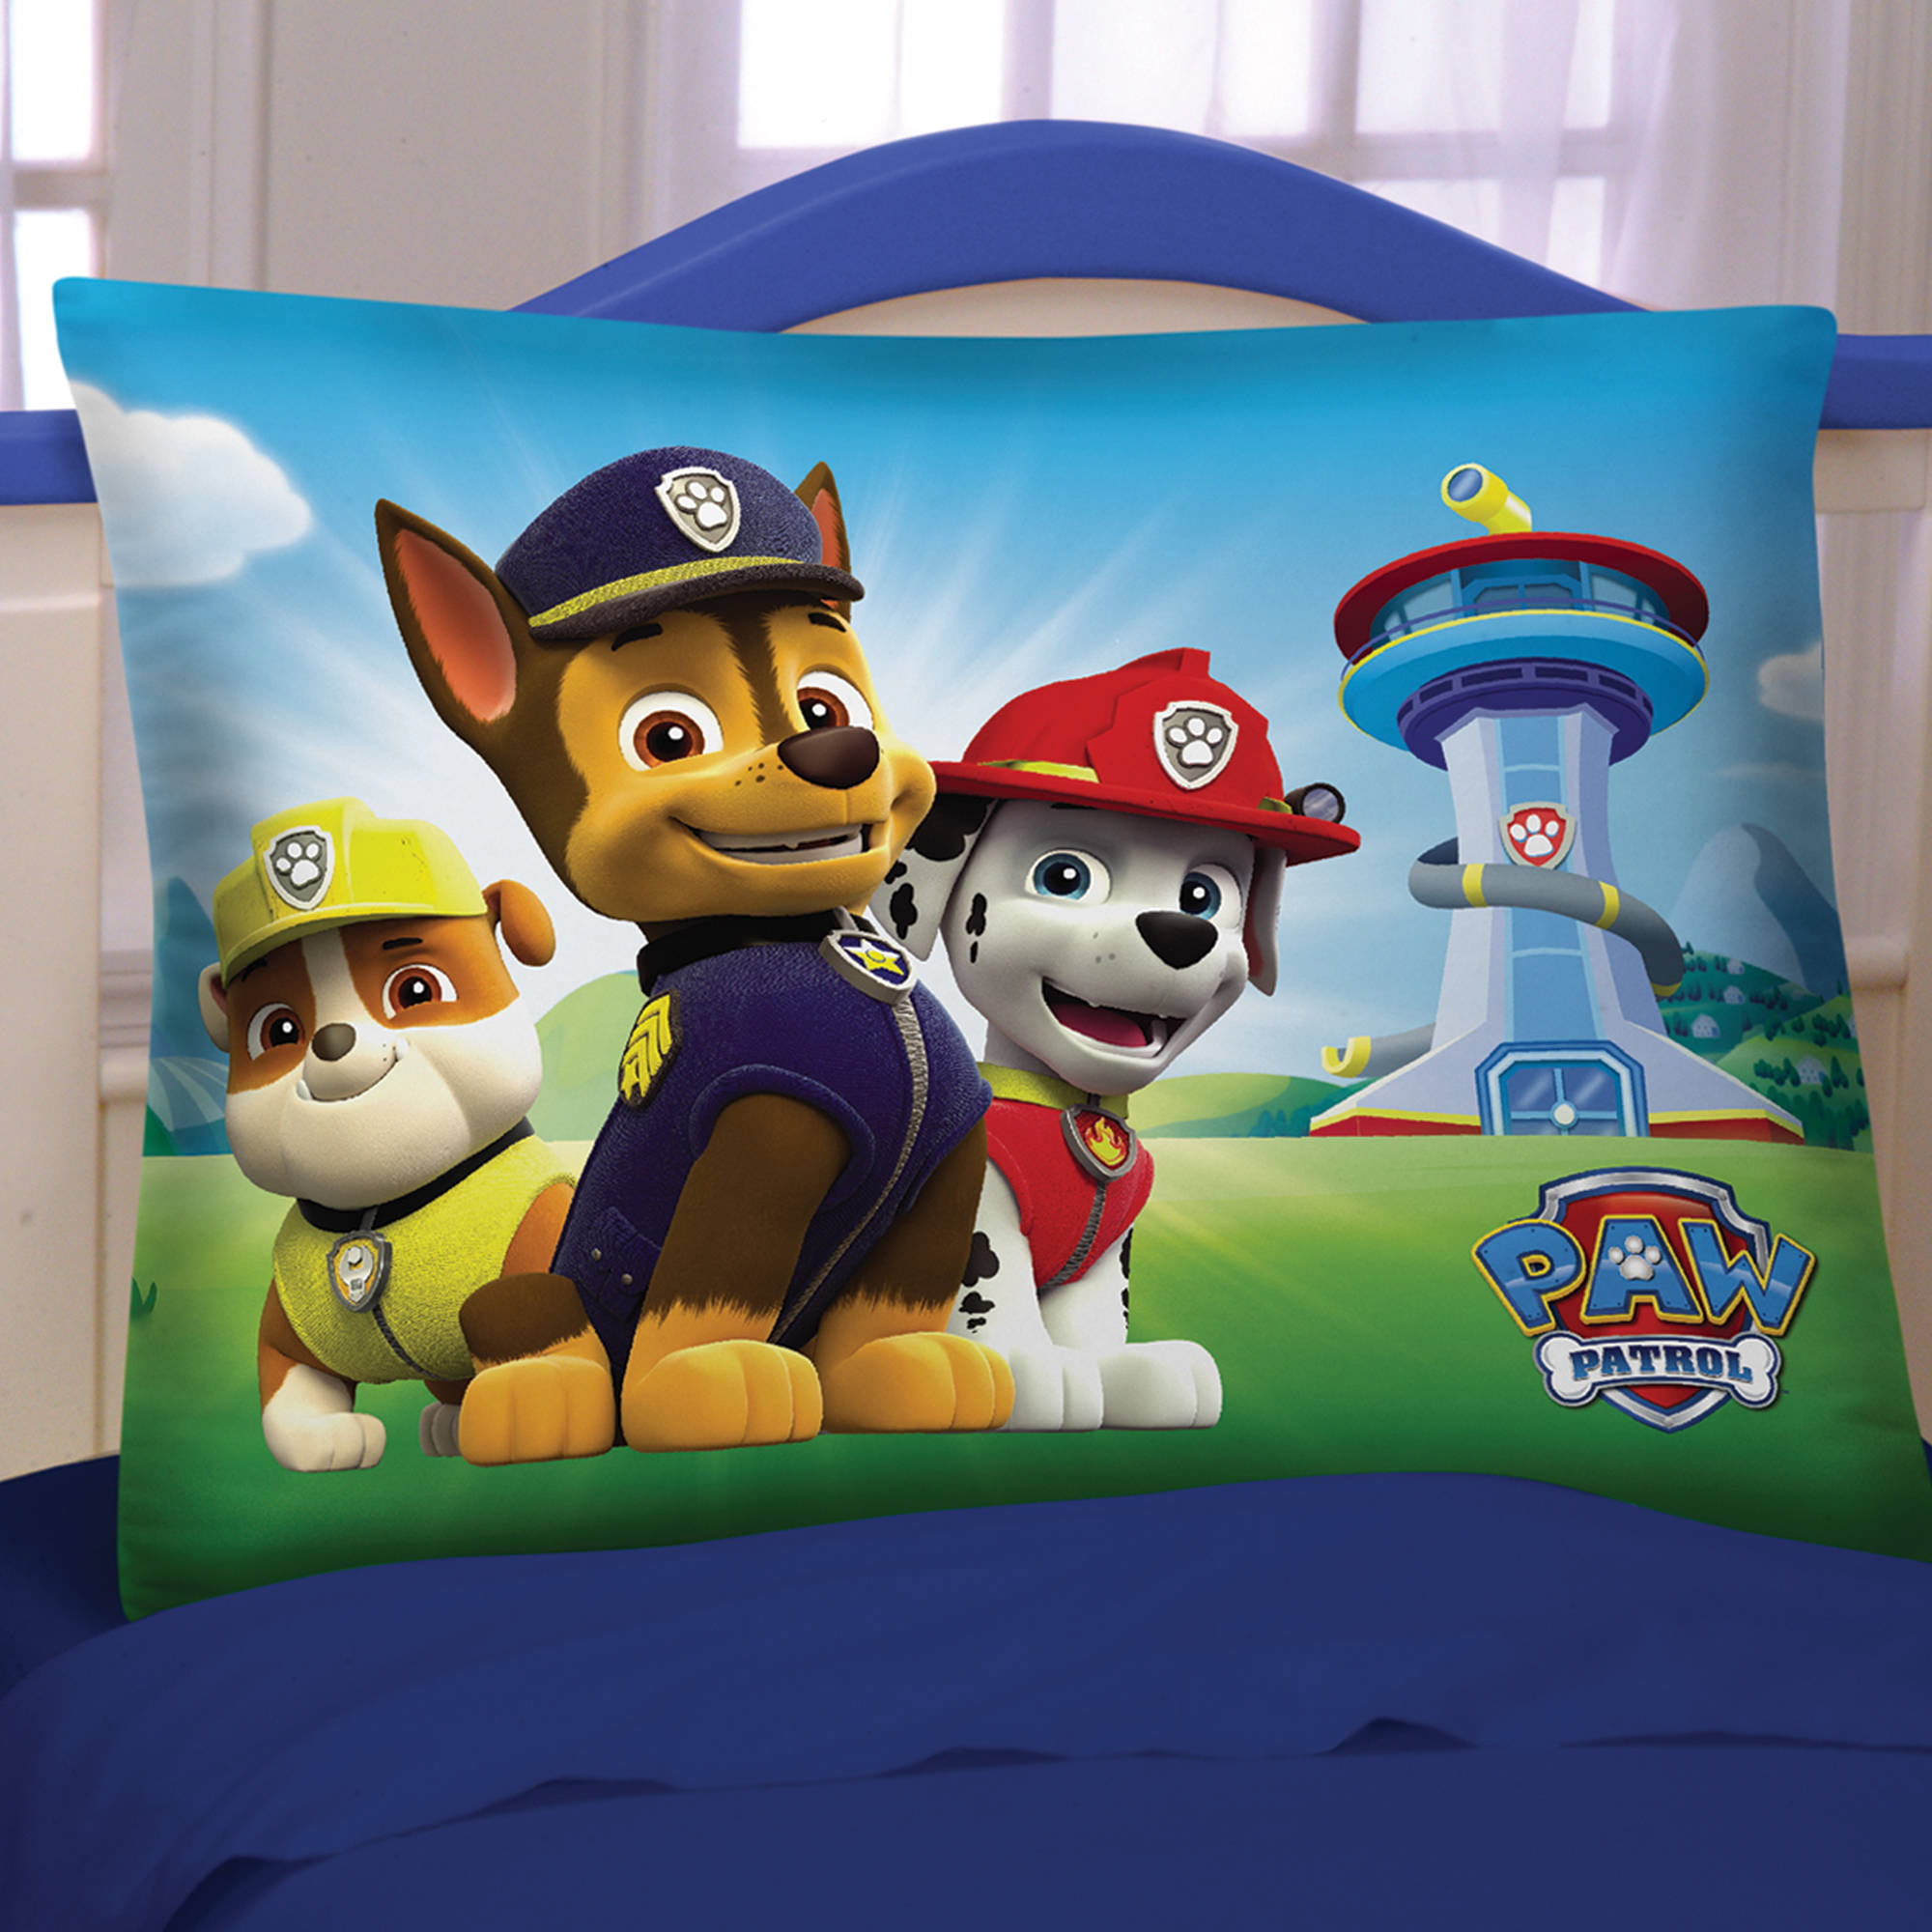 Details about   Paw Patrol Standard Pillowcases Reversible New Sealed Nickelodeon 2015 